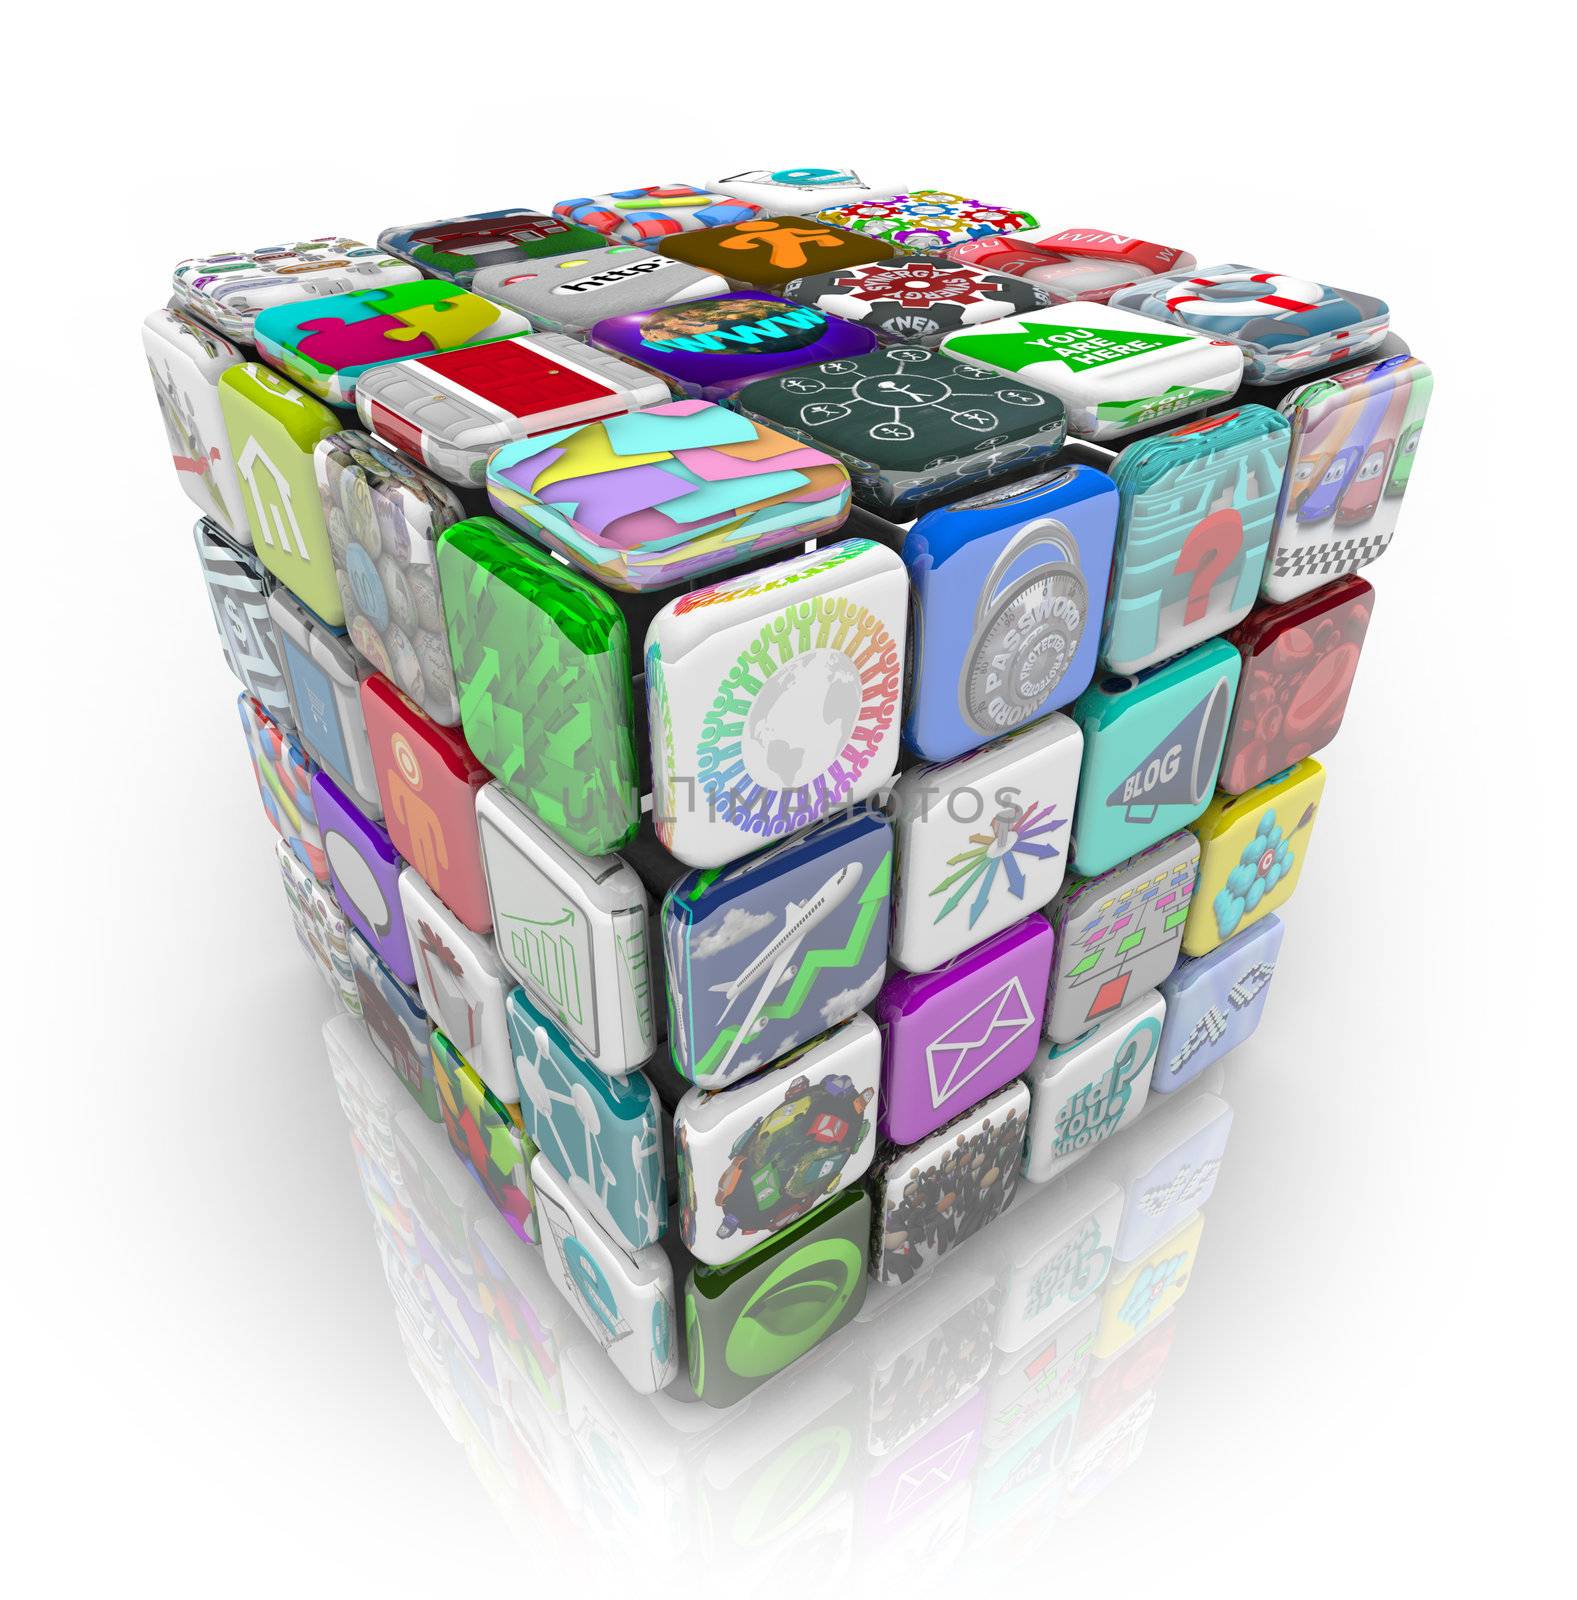 A 3D cube made of app tiles representing applications and software you can buy and download to your smart phone, tablet computer or other mobile device